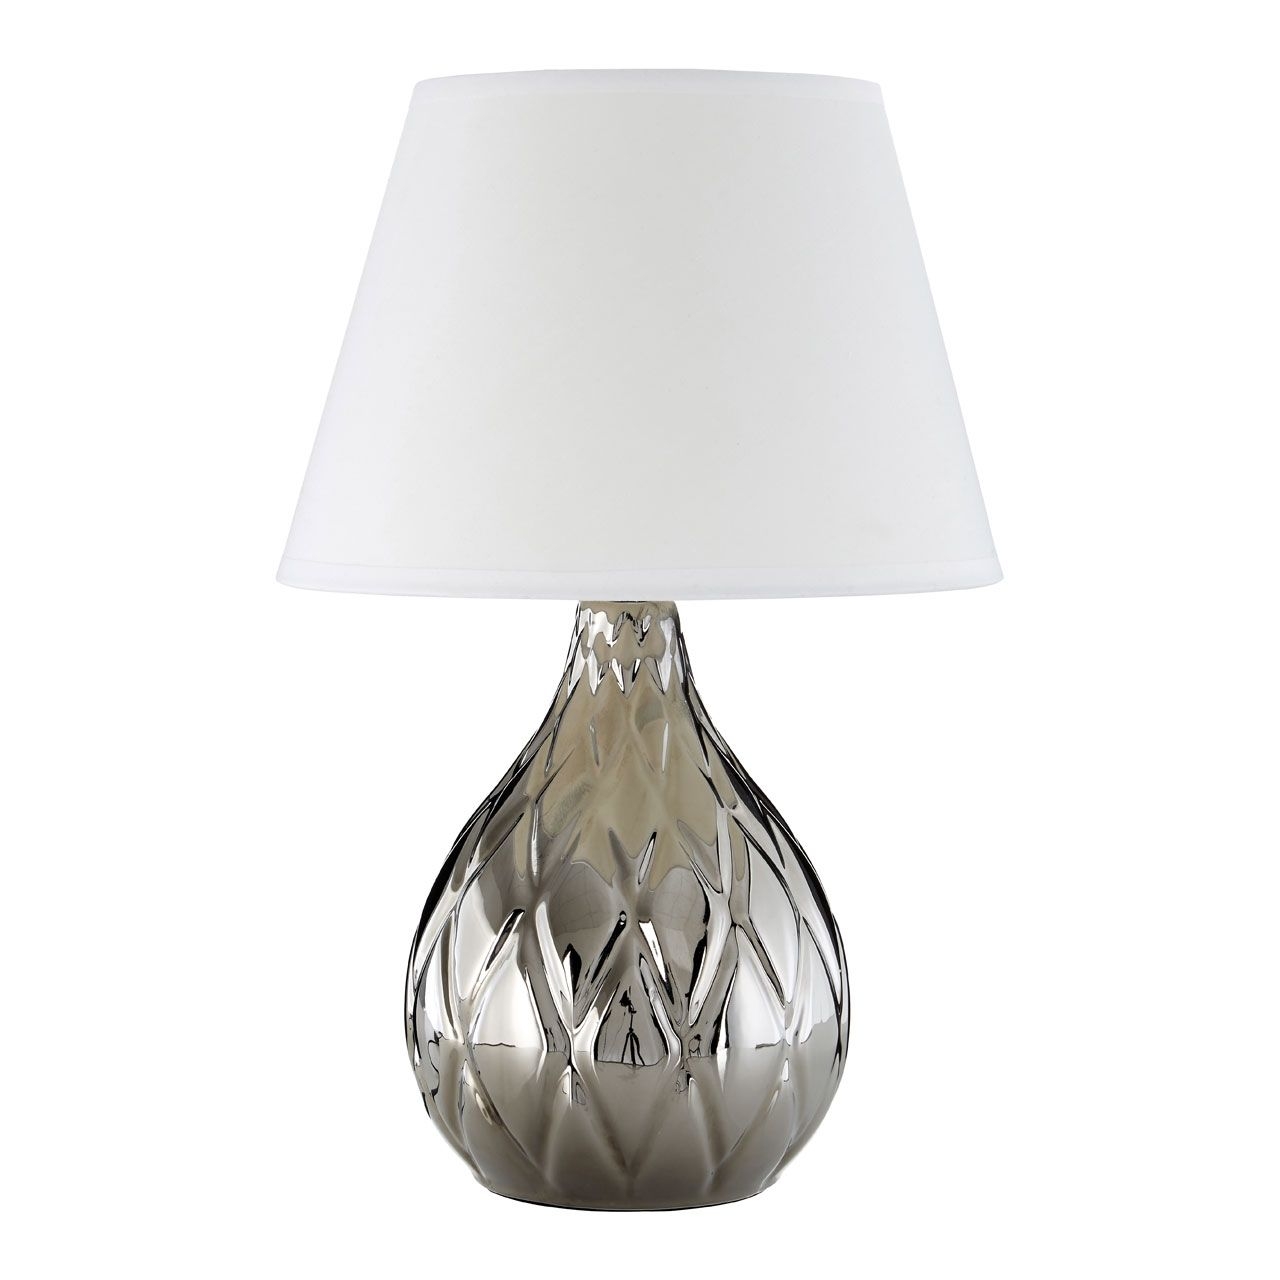 Hannah White Fabric Shade Table Lamp With Silver Base